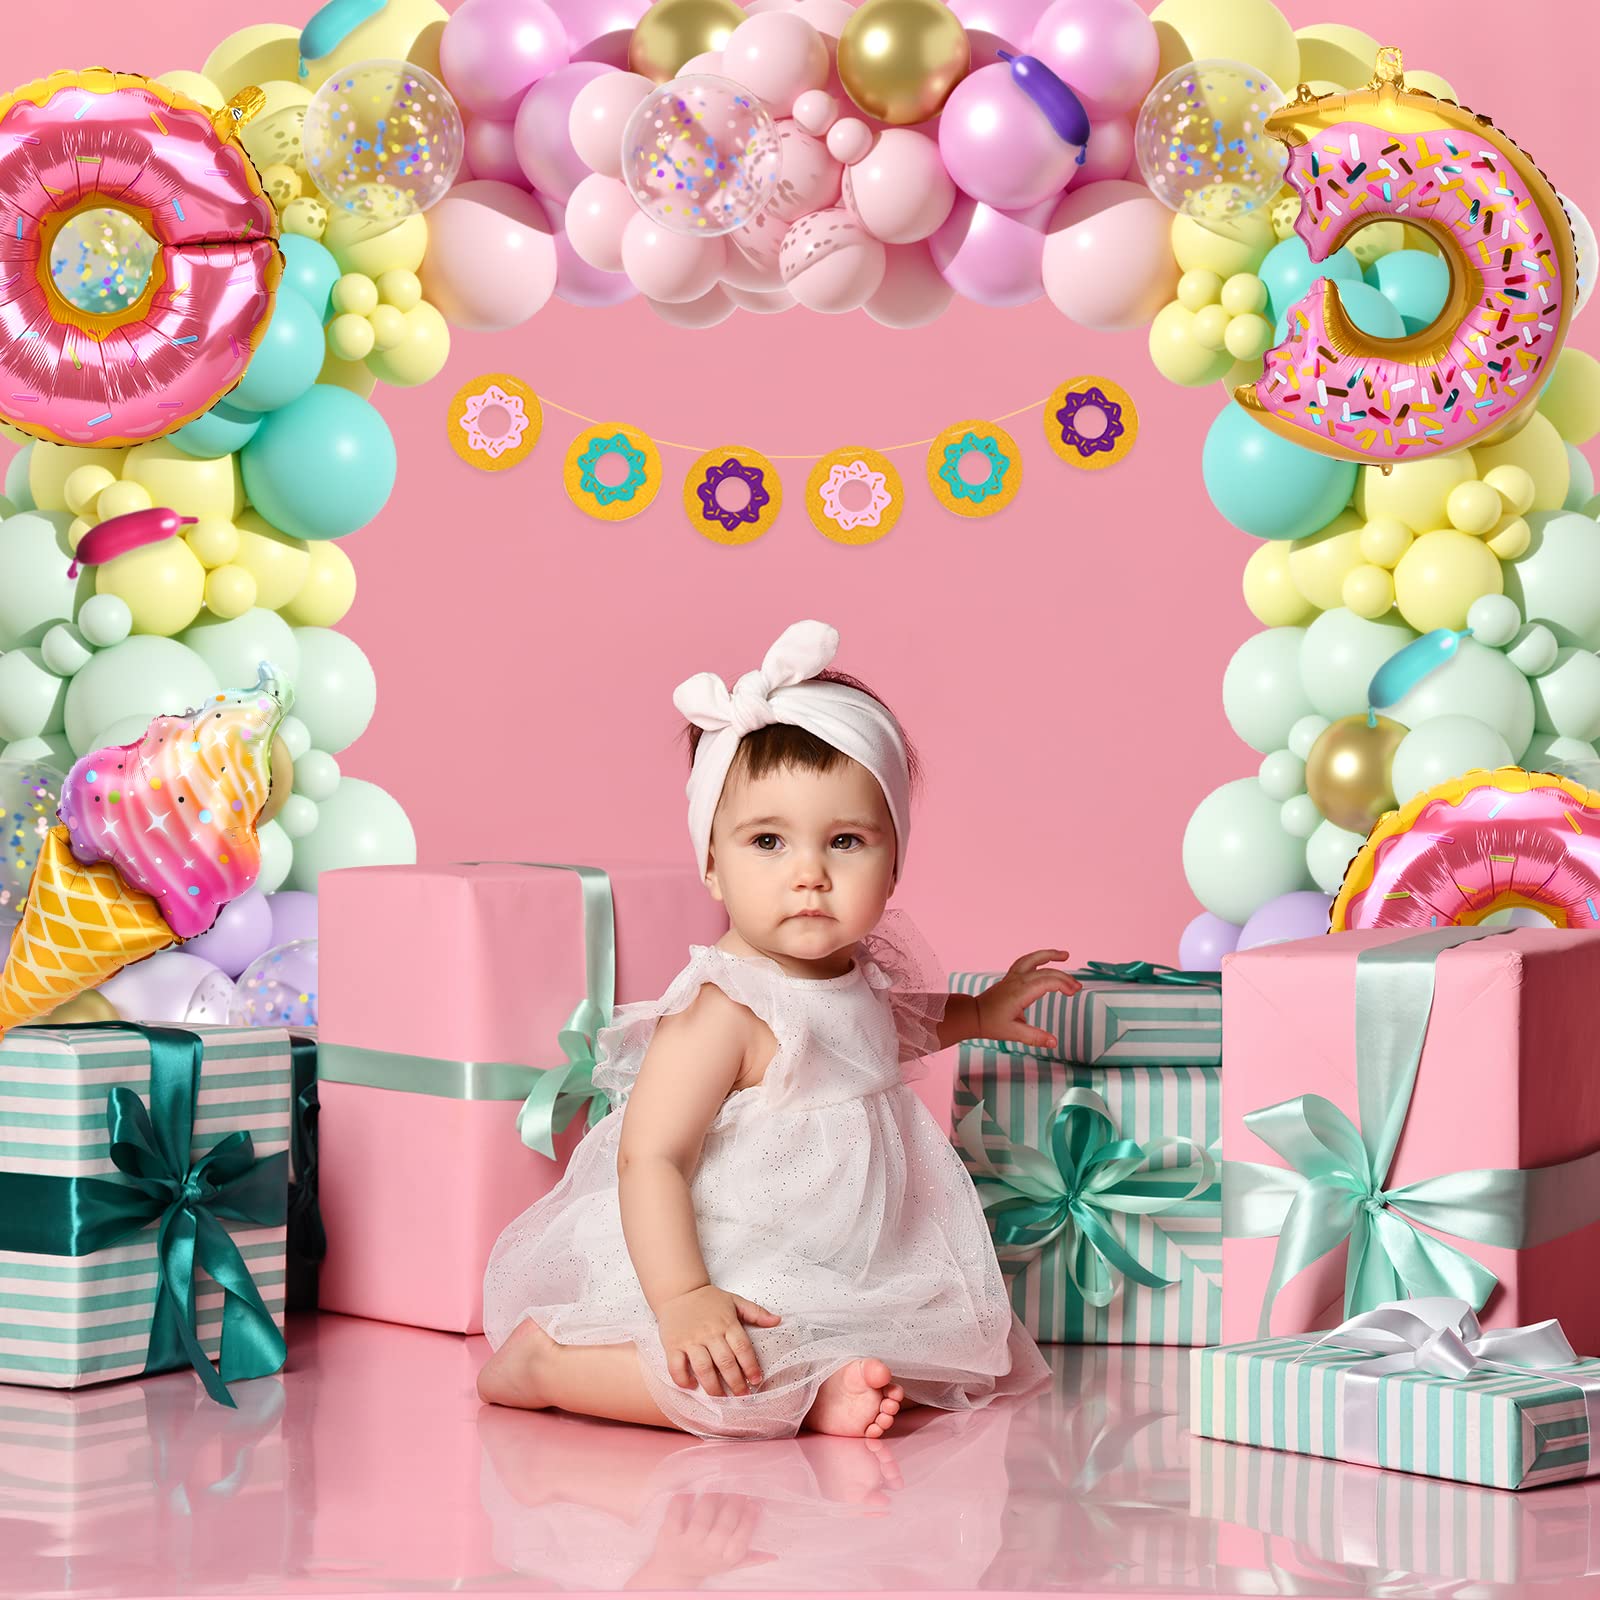 RUBFAC 145pcs Pastel Donut Balloon Garland Arch Kit, Donut Ice Cream Foil Balloons with Banner and Sprinkle Confetti Balloons, Grow Up Baby Shower Sweet One Birthday Party Decoration for Girls